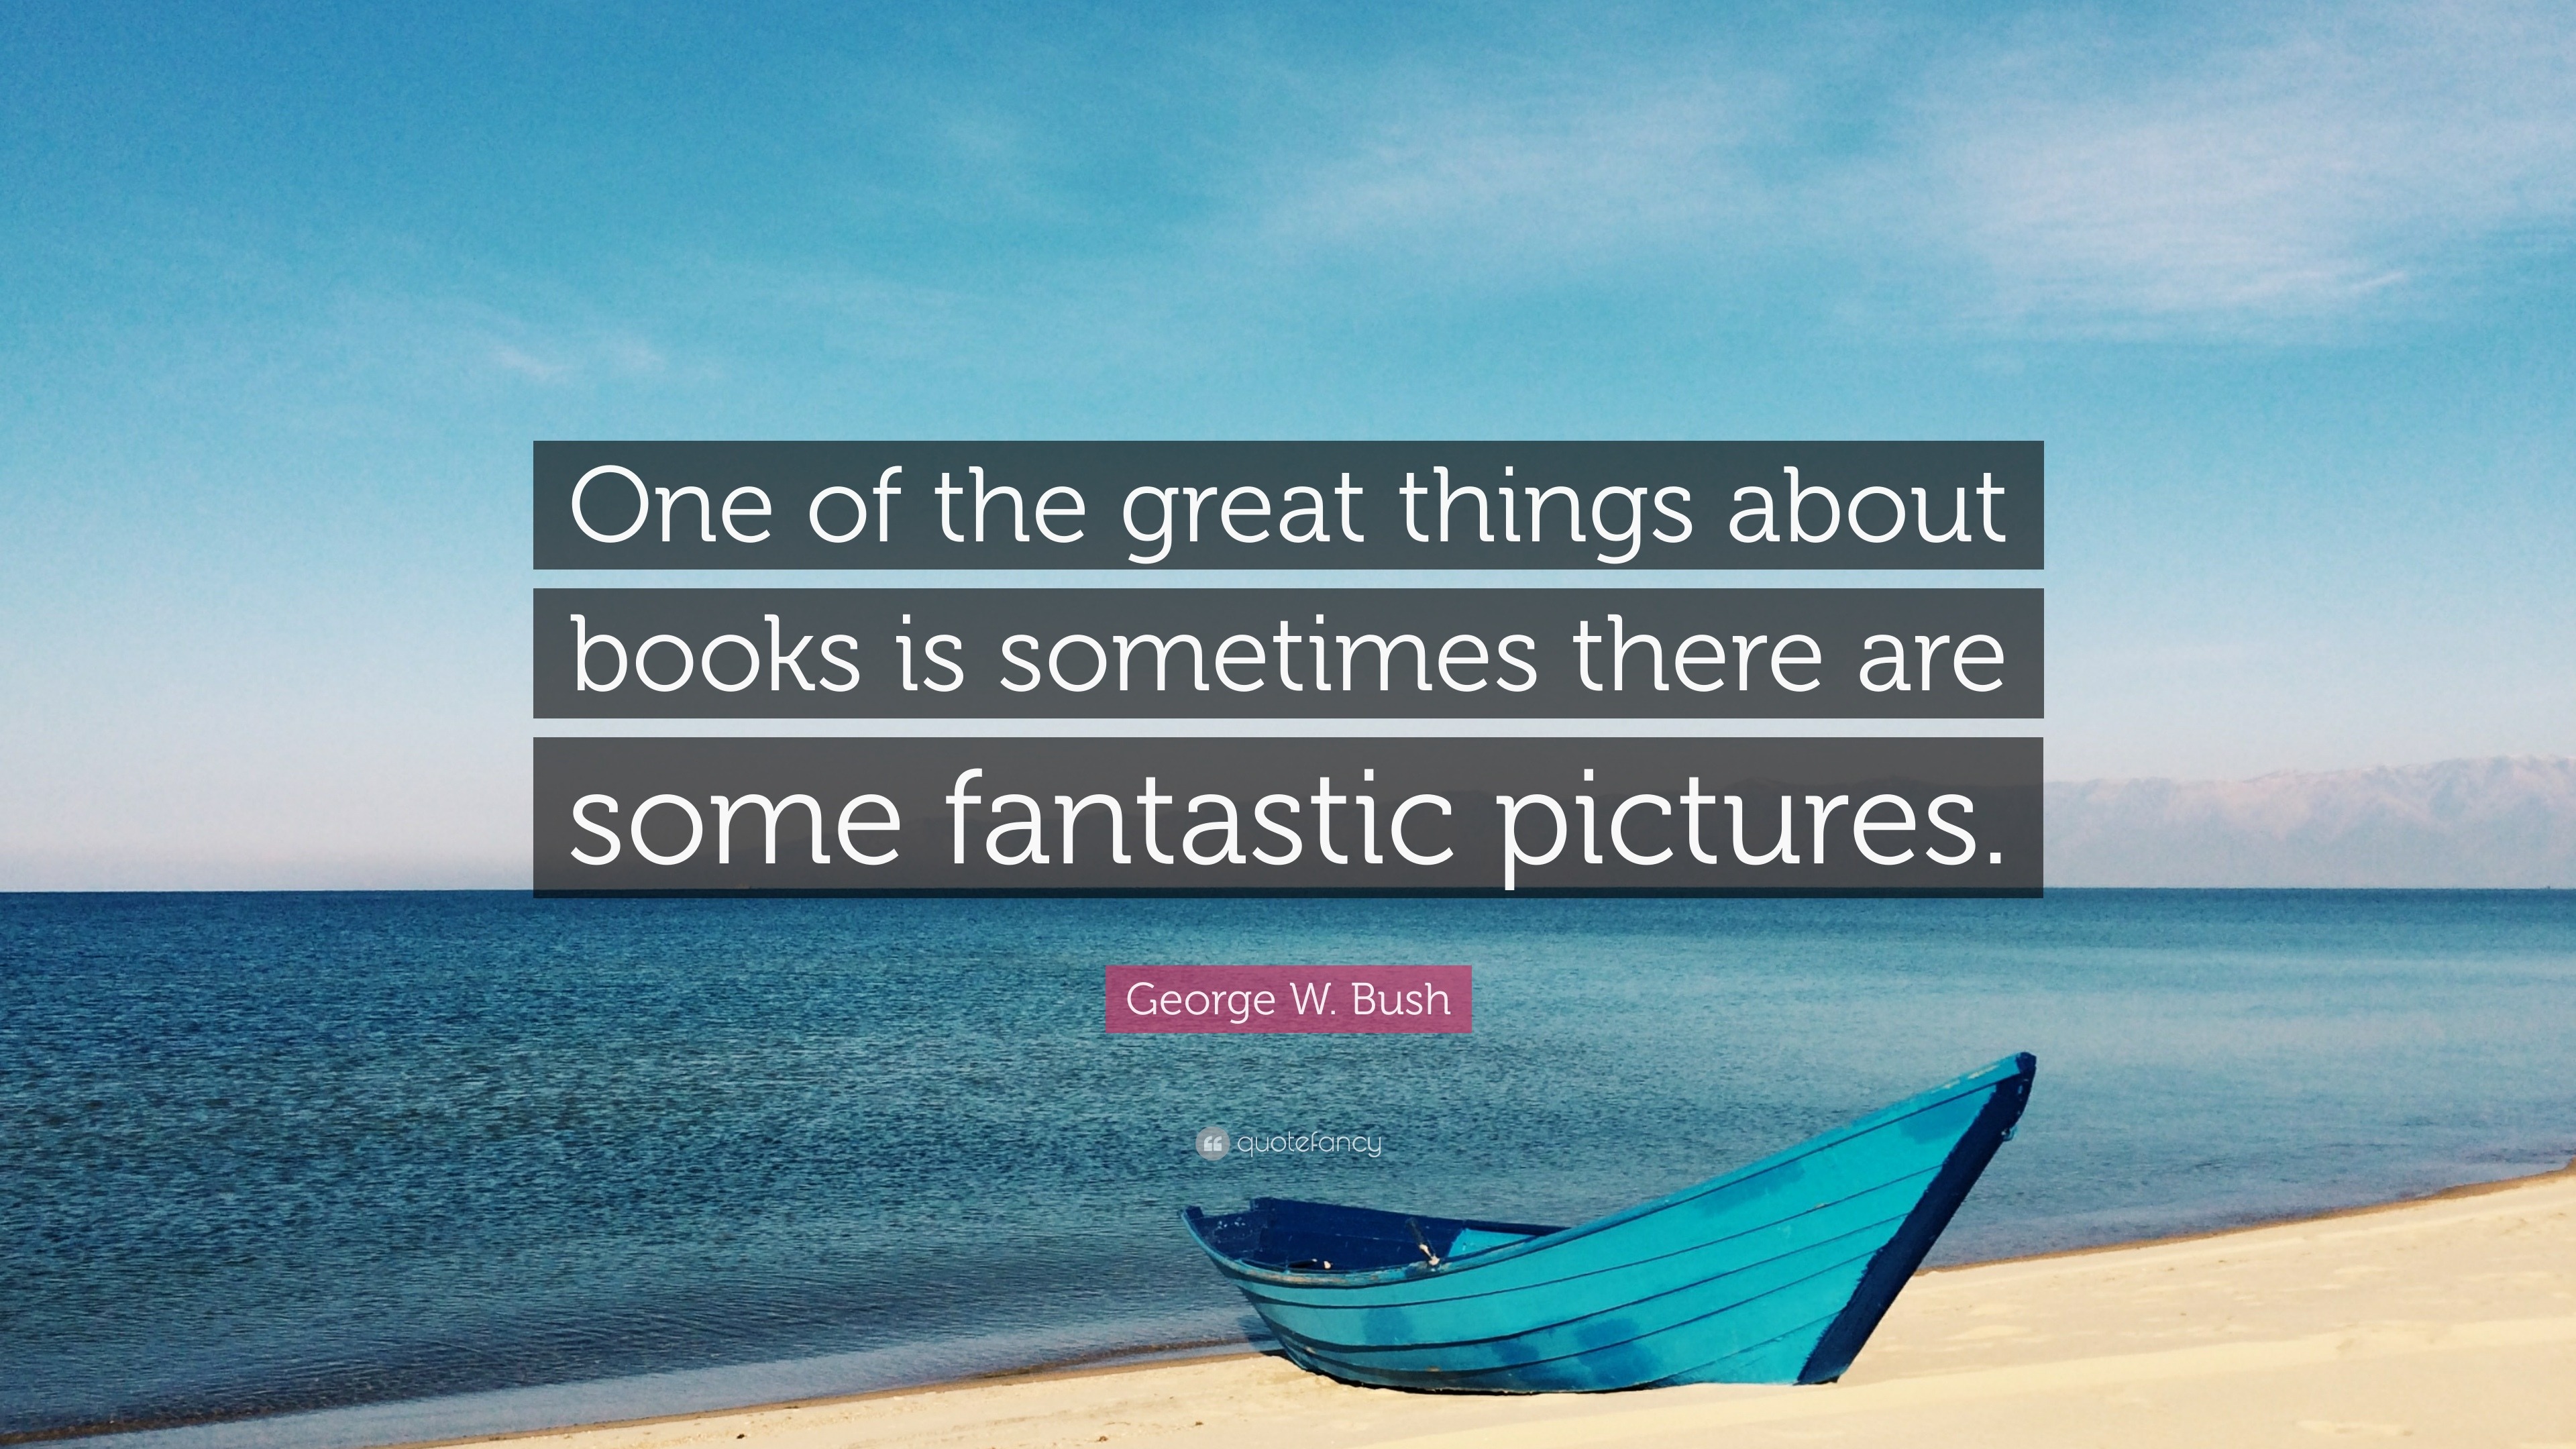 George W. Bush Quote: “One of the great things about books is sometimes ...